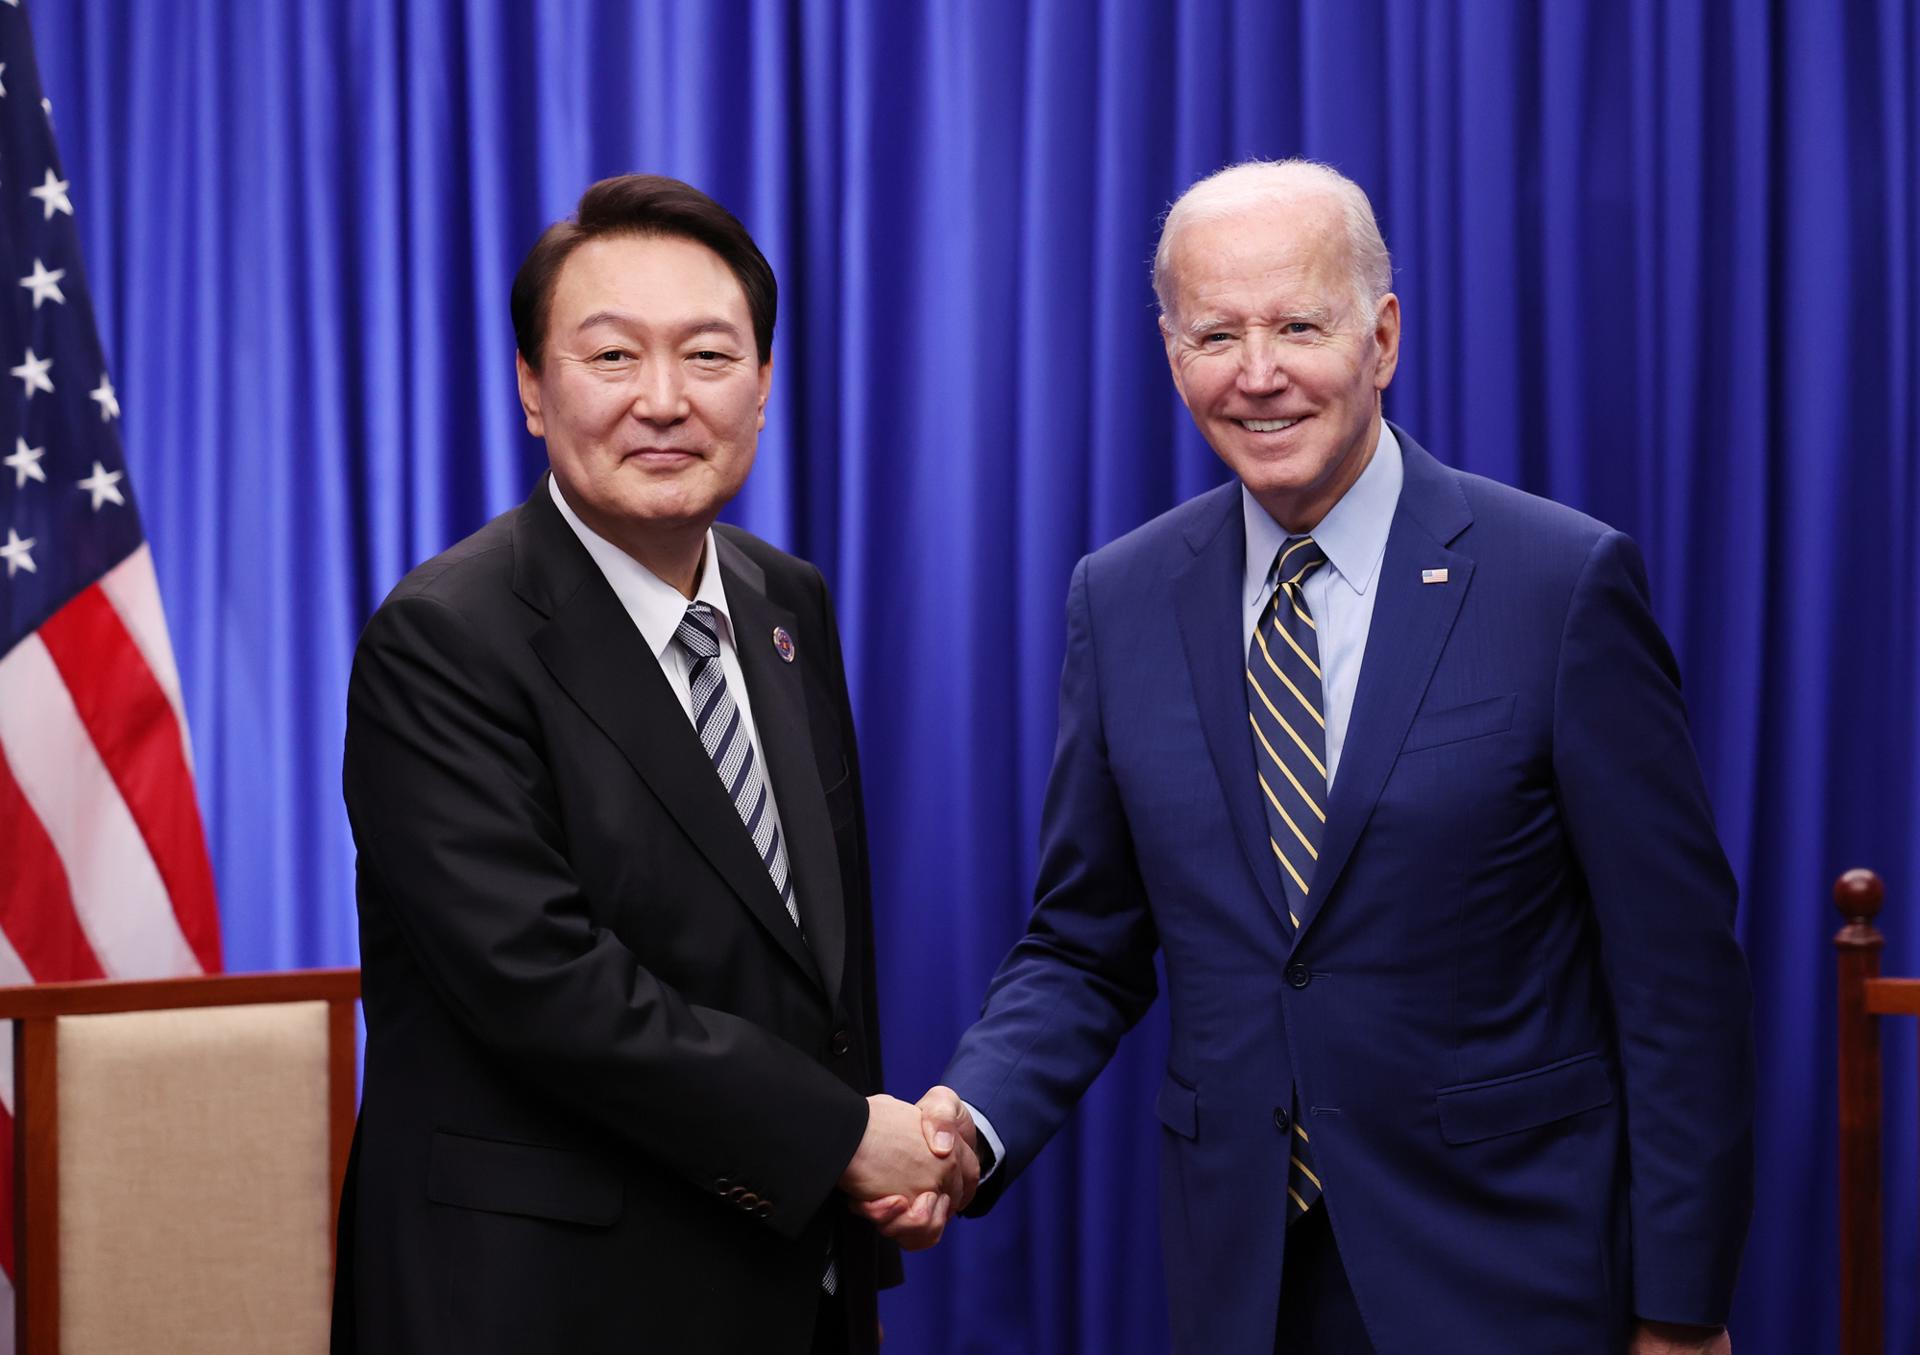 South Korean President Yoon Suk yeol (L) and U.S. President Joe Biden pose for a photo during their bilateral meeting during the Association of Southeast Asian Nations (ASEAN) Summit in Phnom Penh in Cambodia, 13 November 2022. EFE-EPA FILE/YONHAP SOUTH KOREA OUT